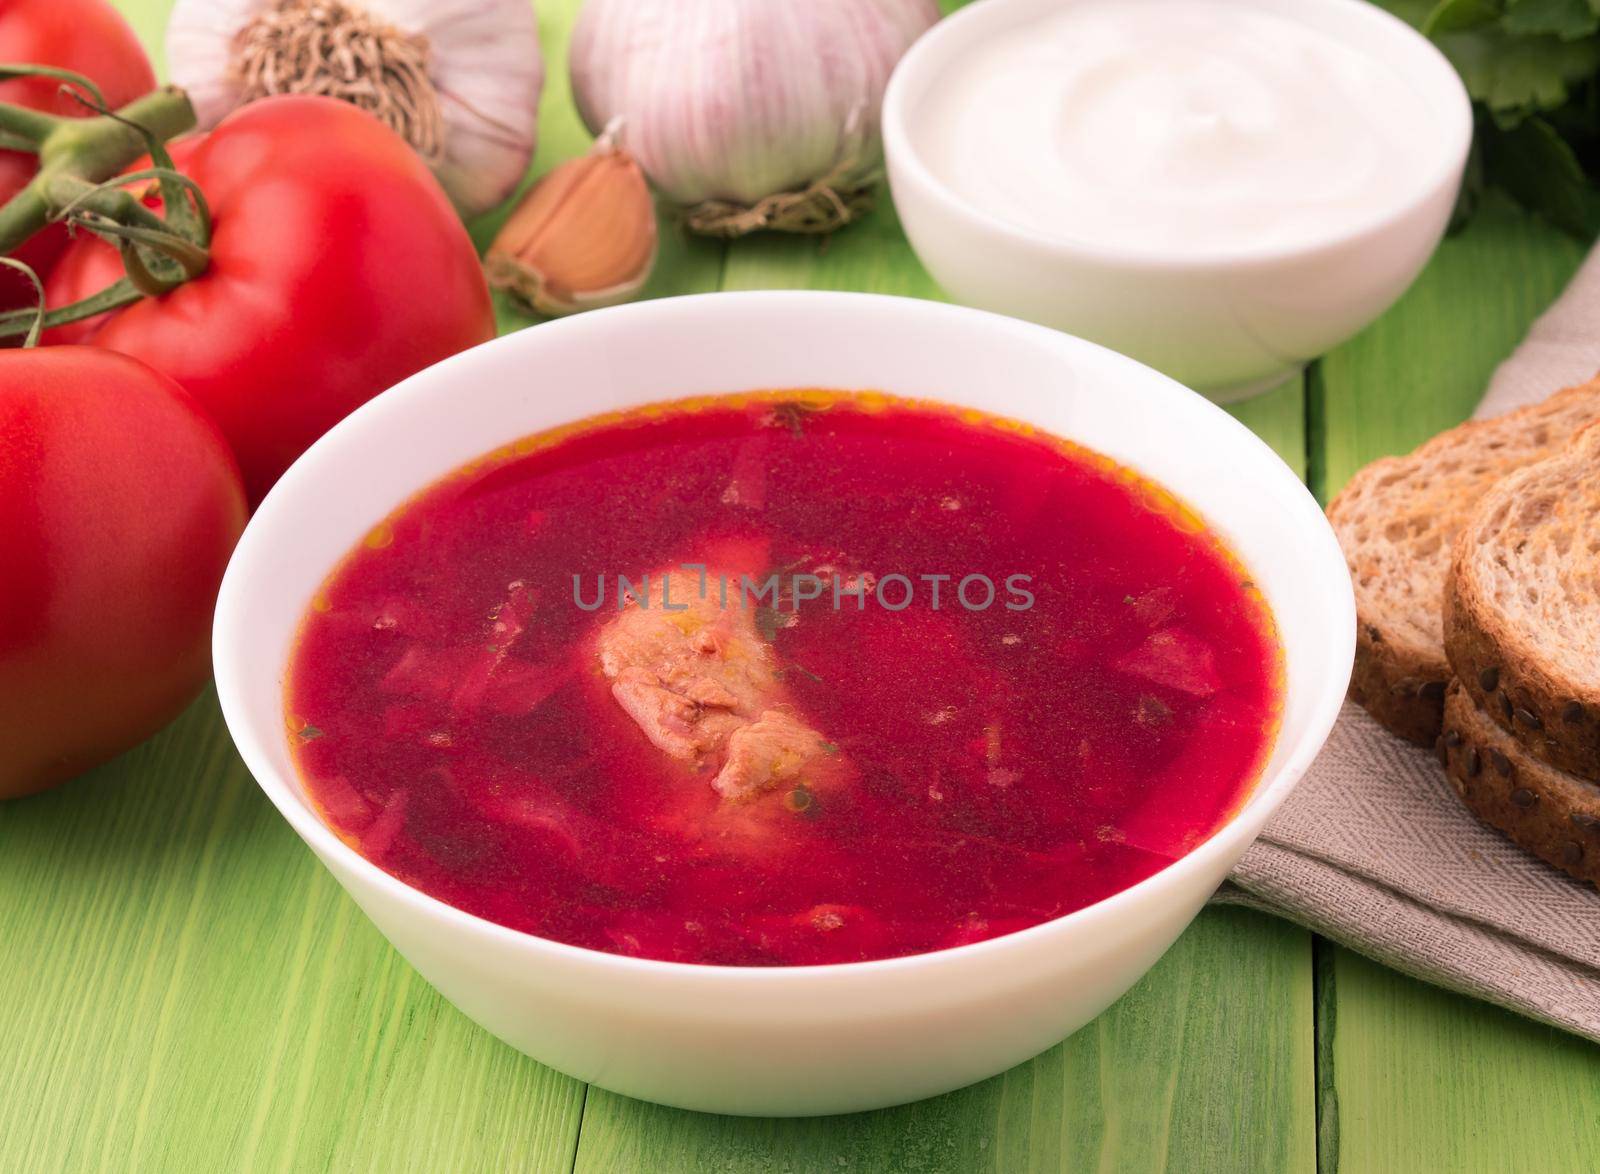 borscht - a soup based on beet, it has a characteristic red color. A traditional dish of the Eastern Slavs, the first main meal of the South Russian and Ukrainian cuisine. Dish, garlic, greens, bread, tomatoes and sour cream